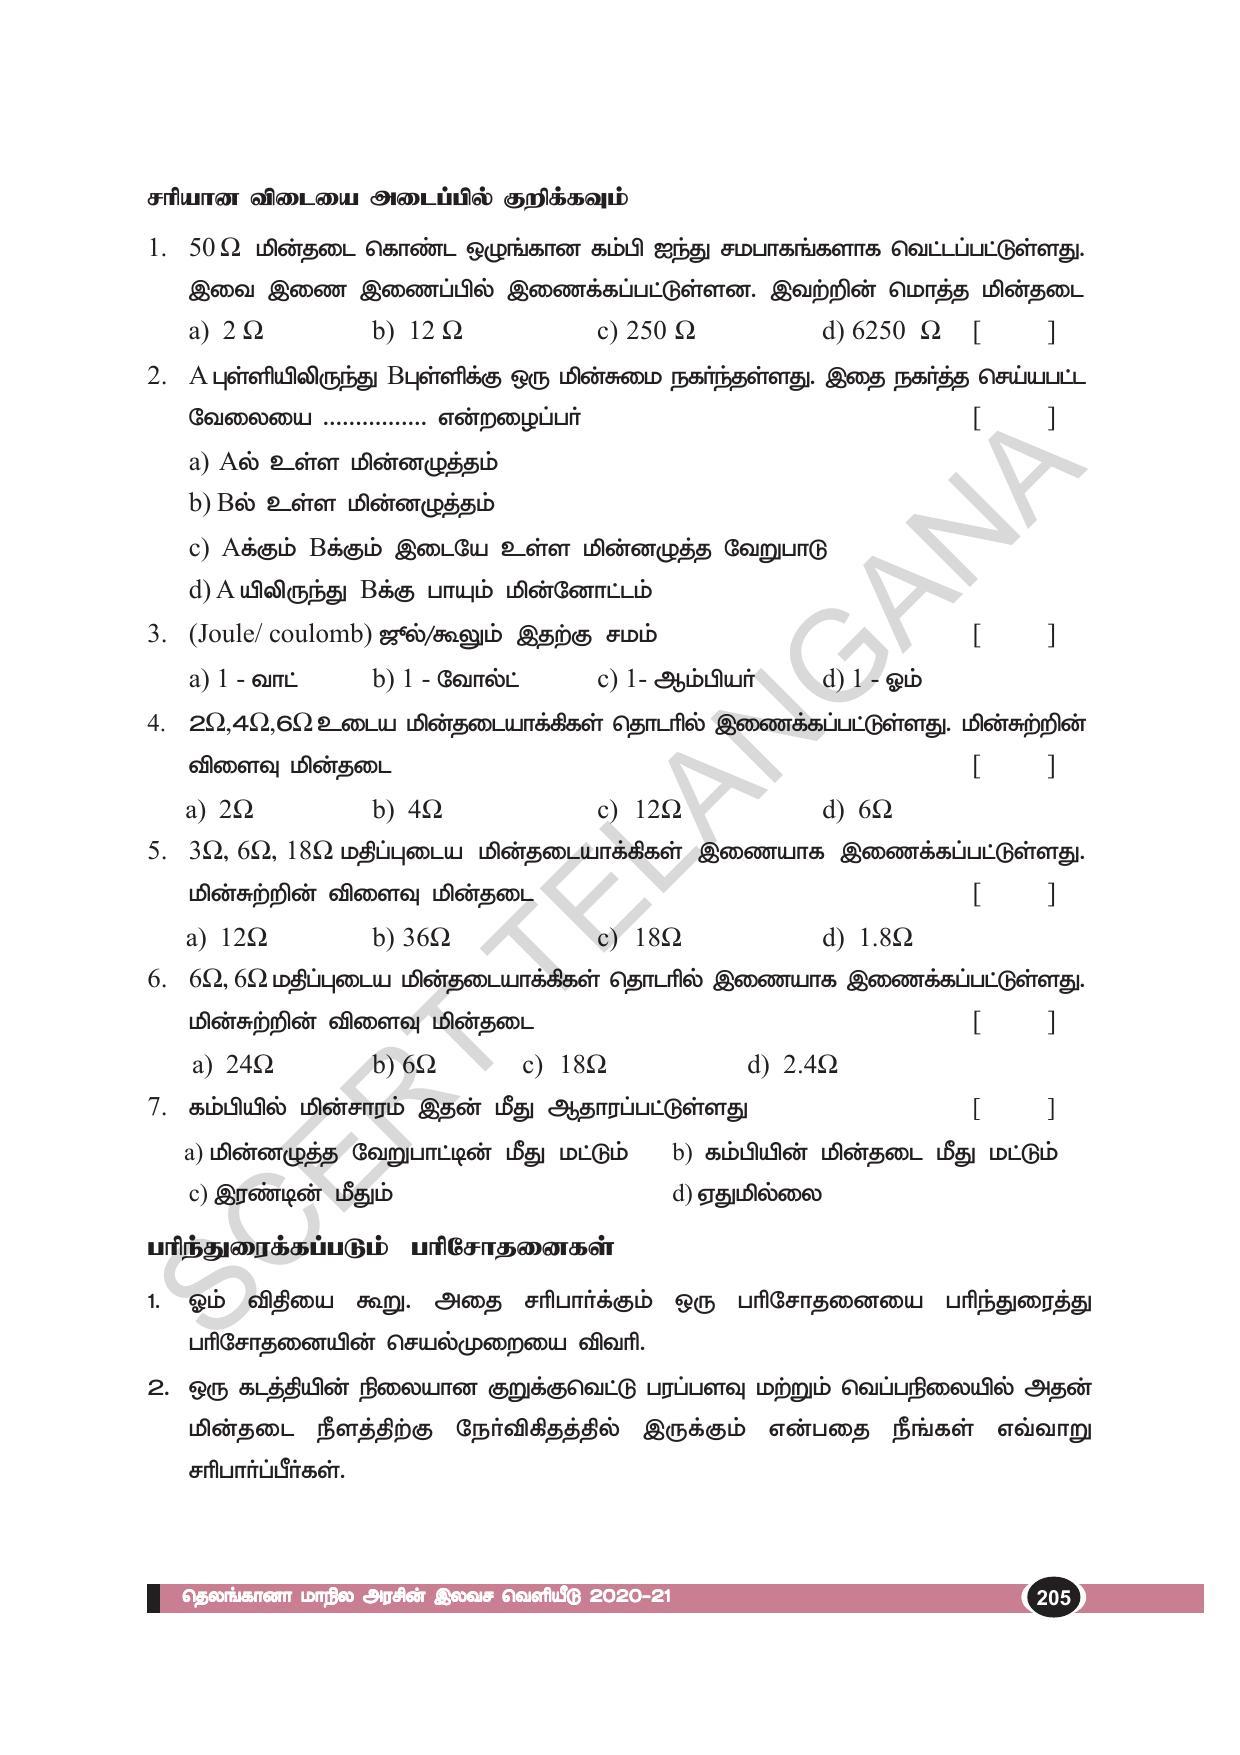 TS SCERT Class 10 Physical Science(Tamil Medium) Text Book - Page 217